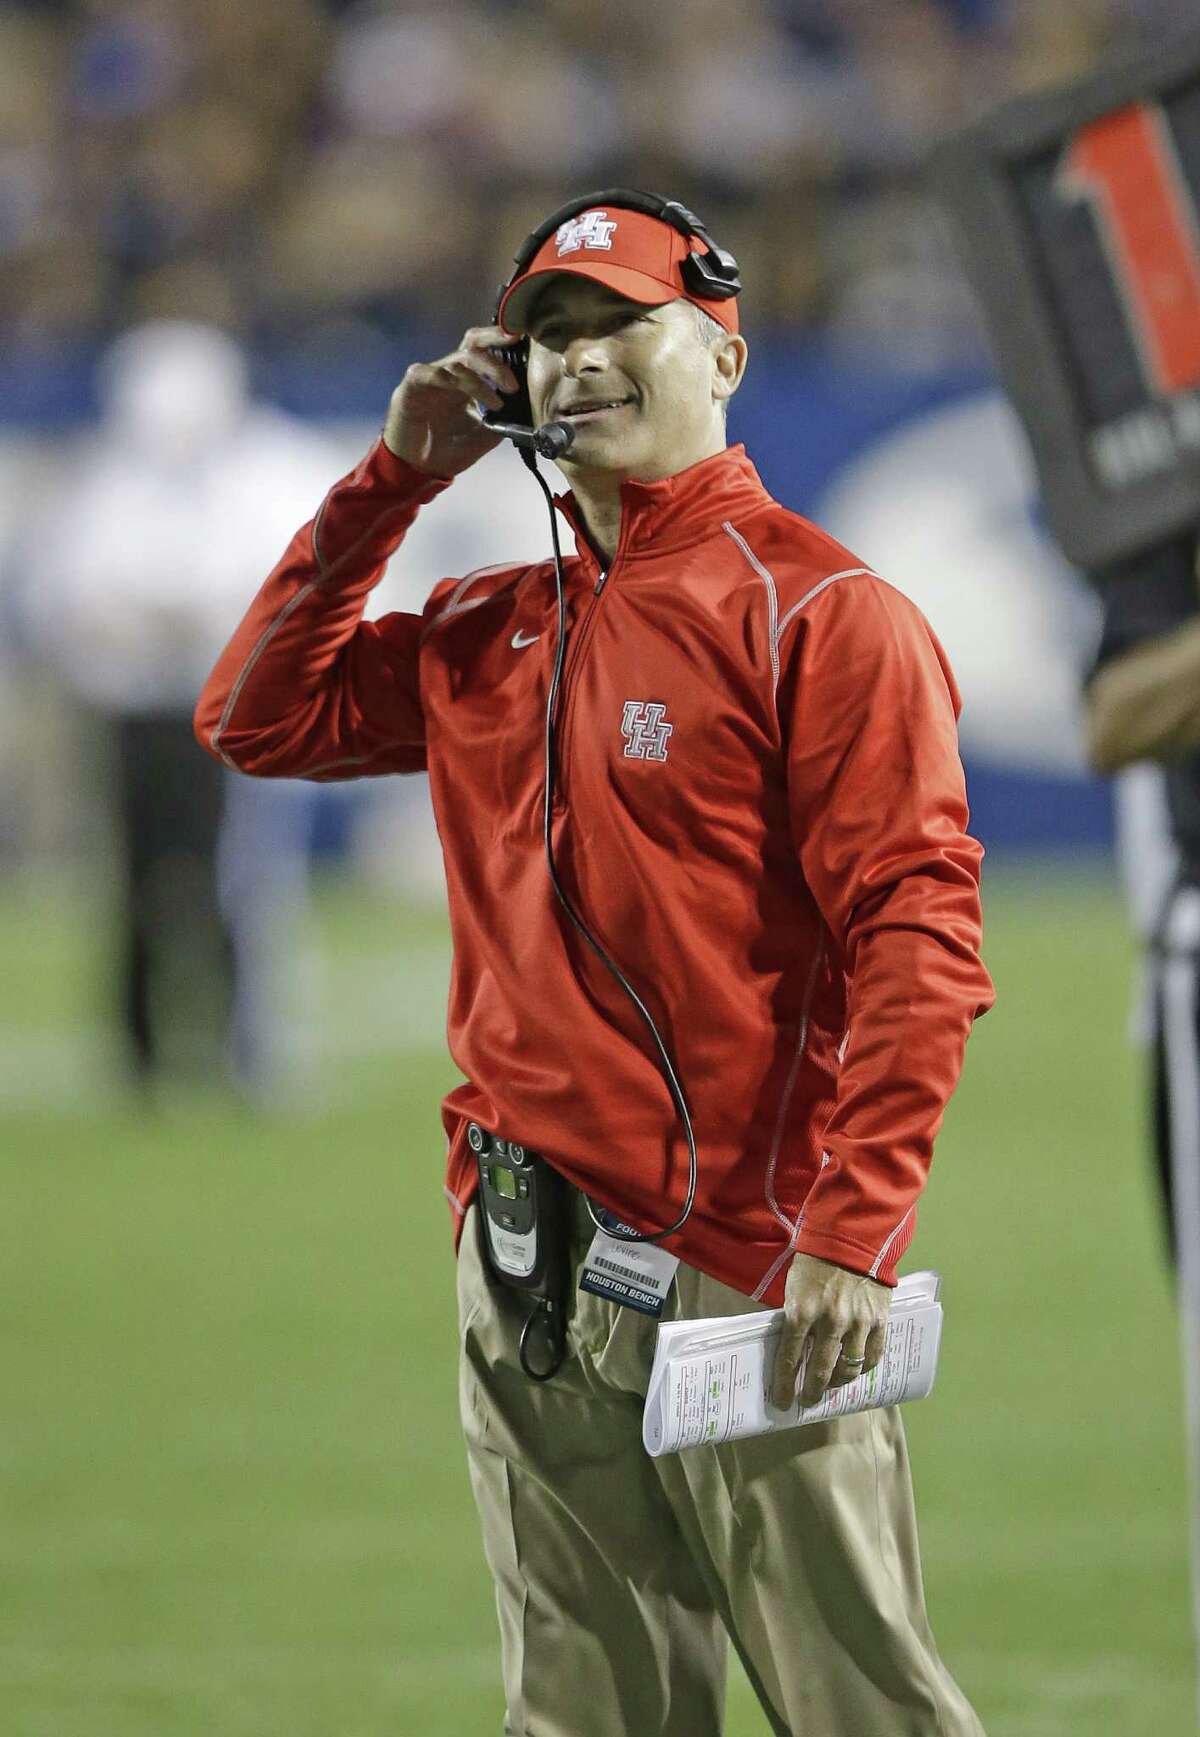 Houston head coach Tony Levine looks on in the second quarter during an NCAA college football game against BYU, Thursday, Sept. 11, 2014, in Provo, Utah.(AP Photo/Rick Bowmer)